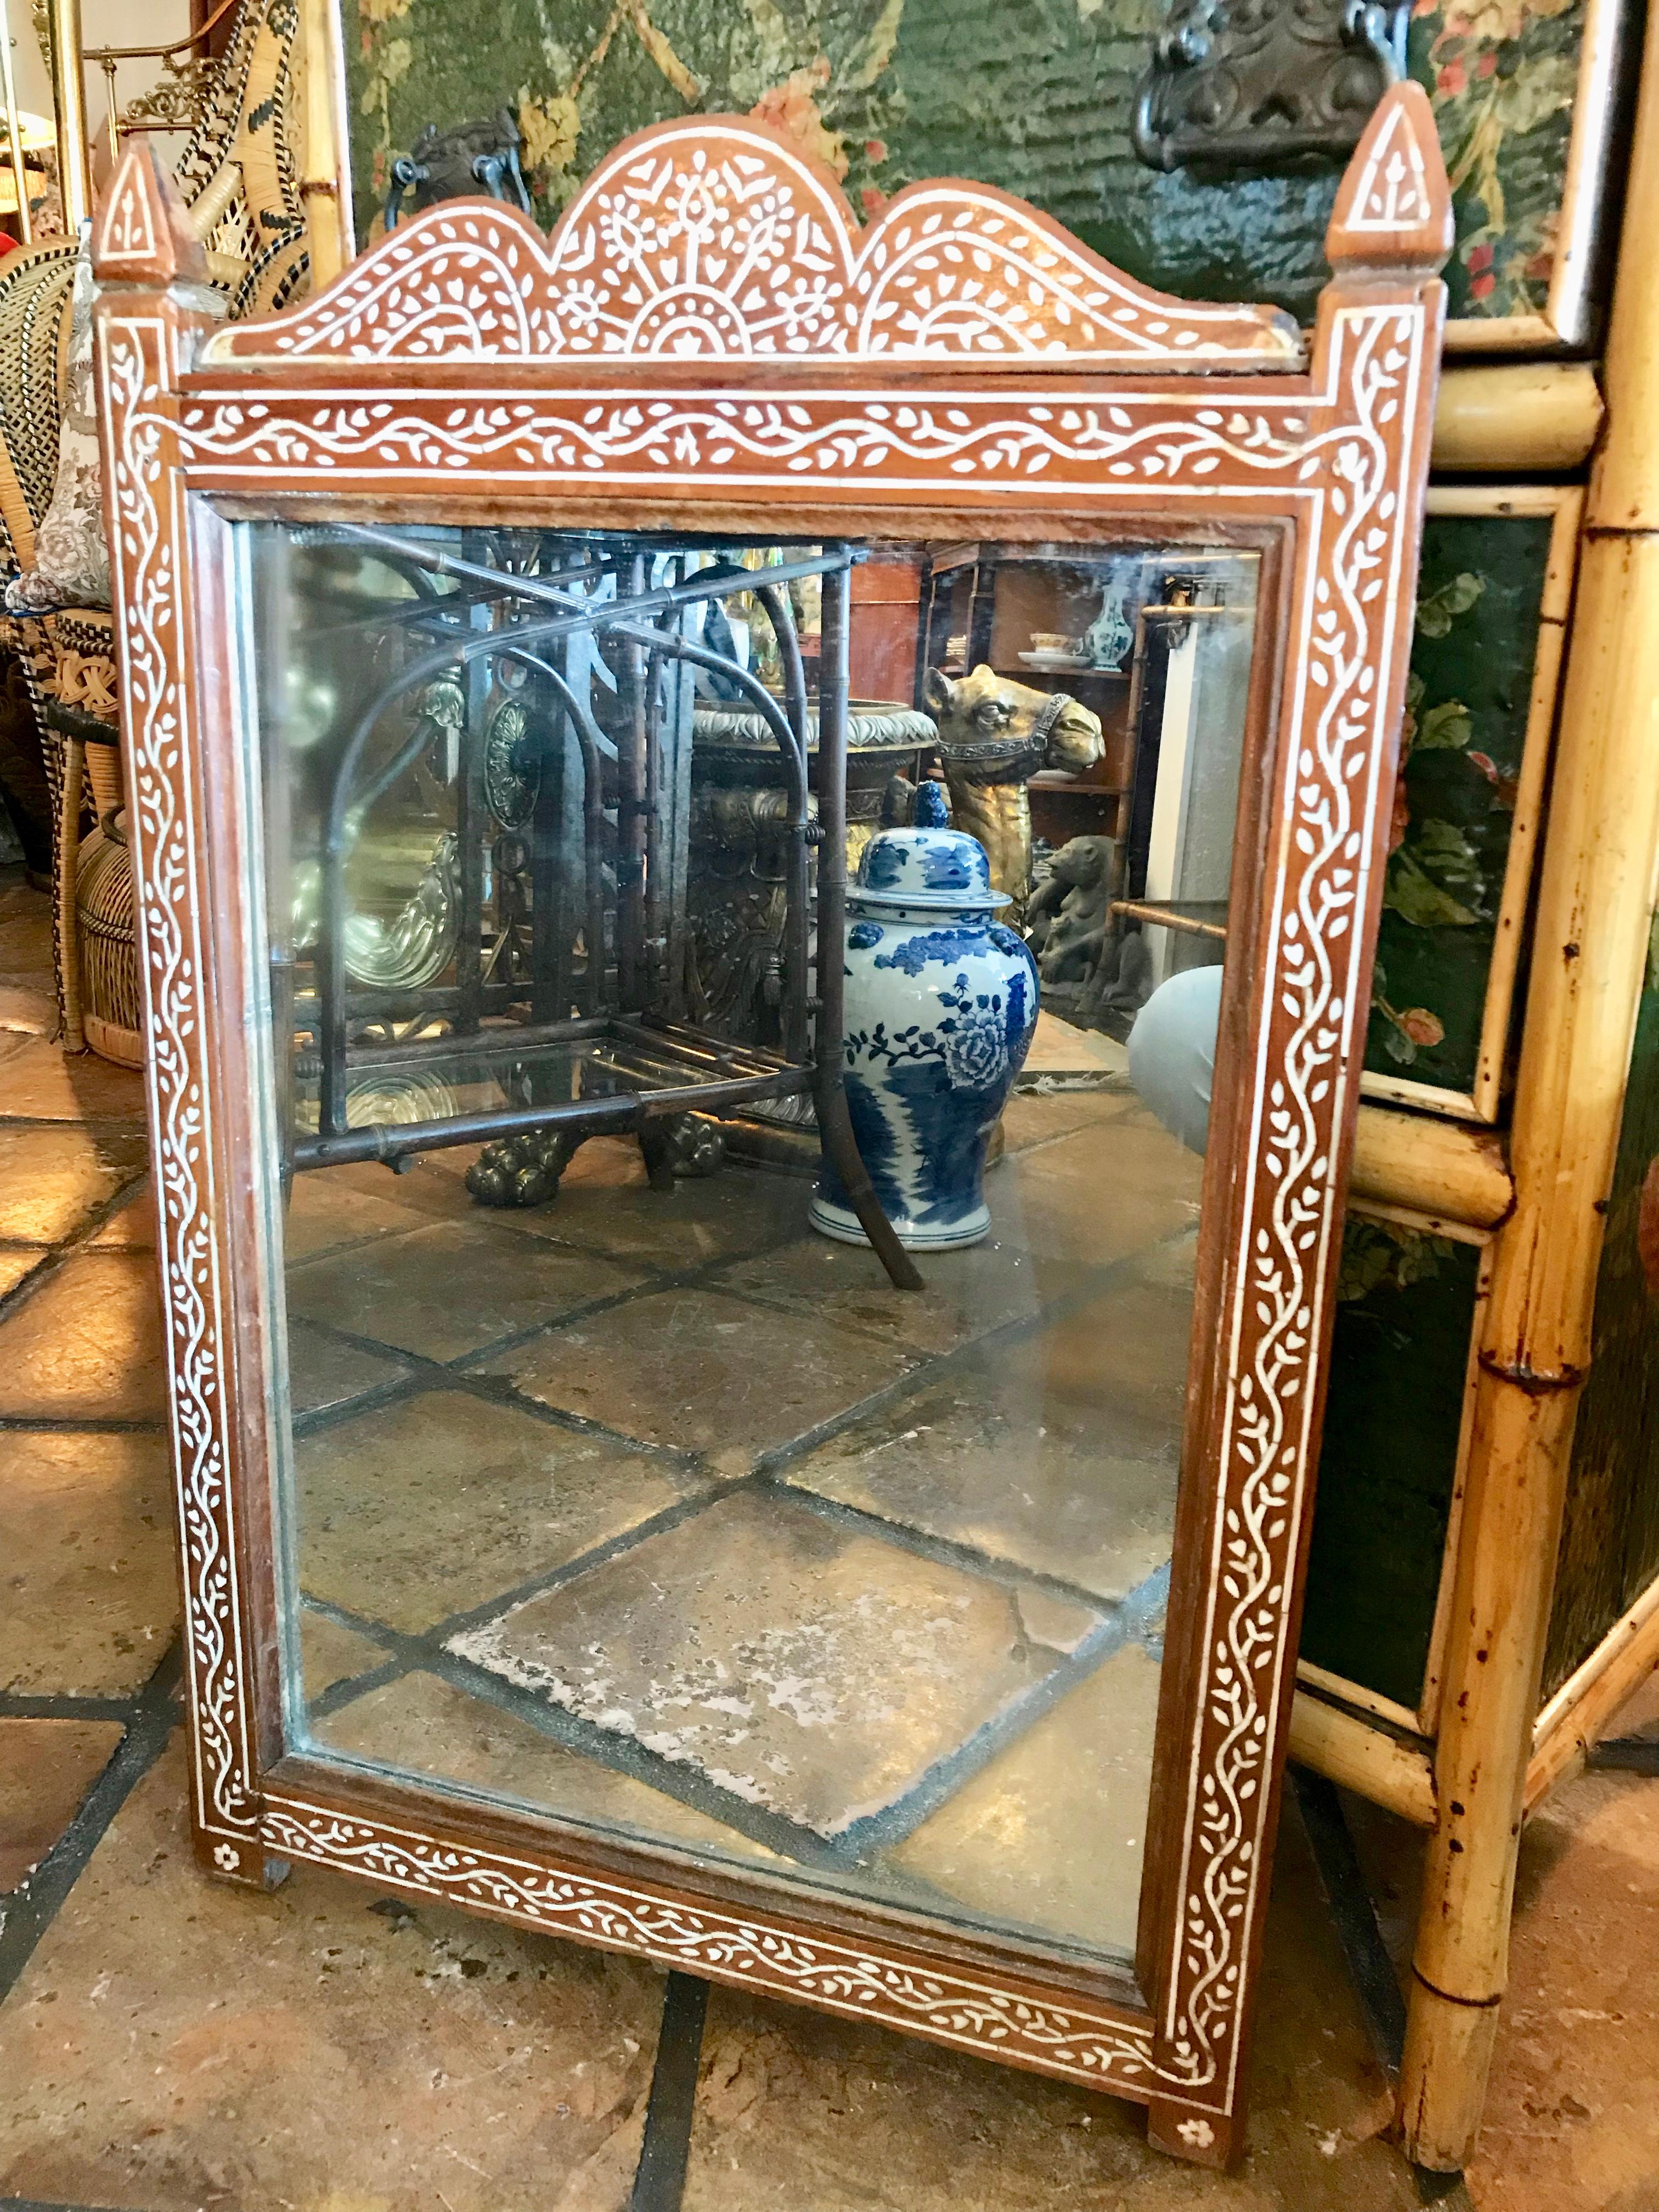 Extensively inlaid hard wood. A nice accent mirror,
late 19th century.